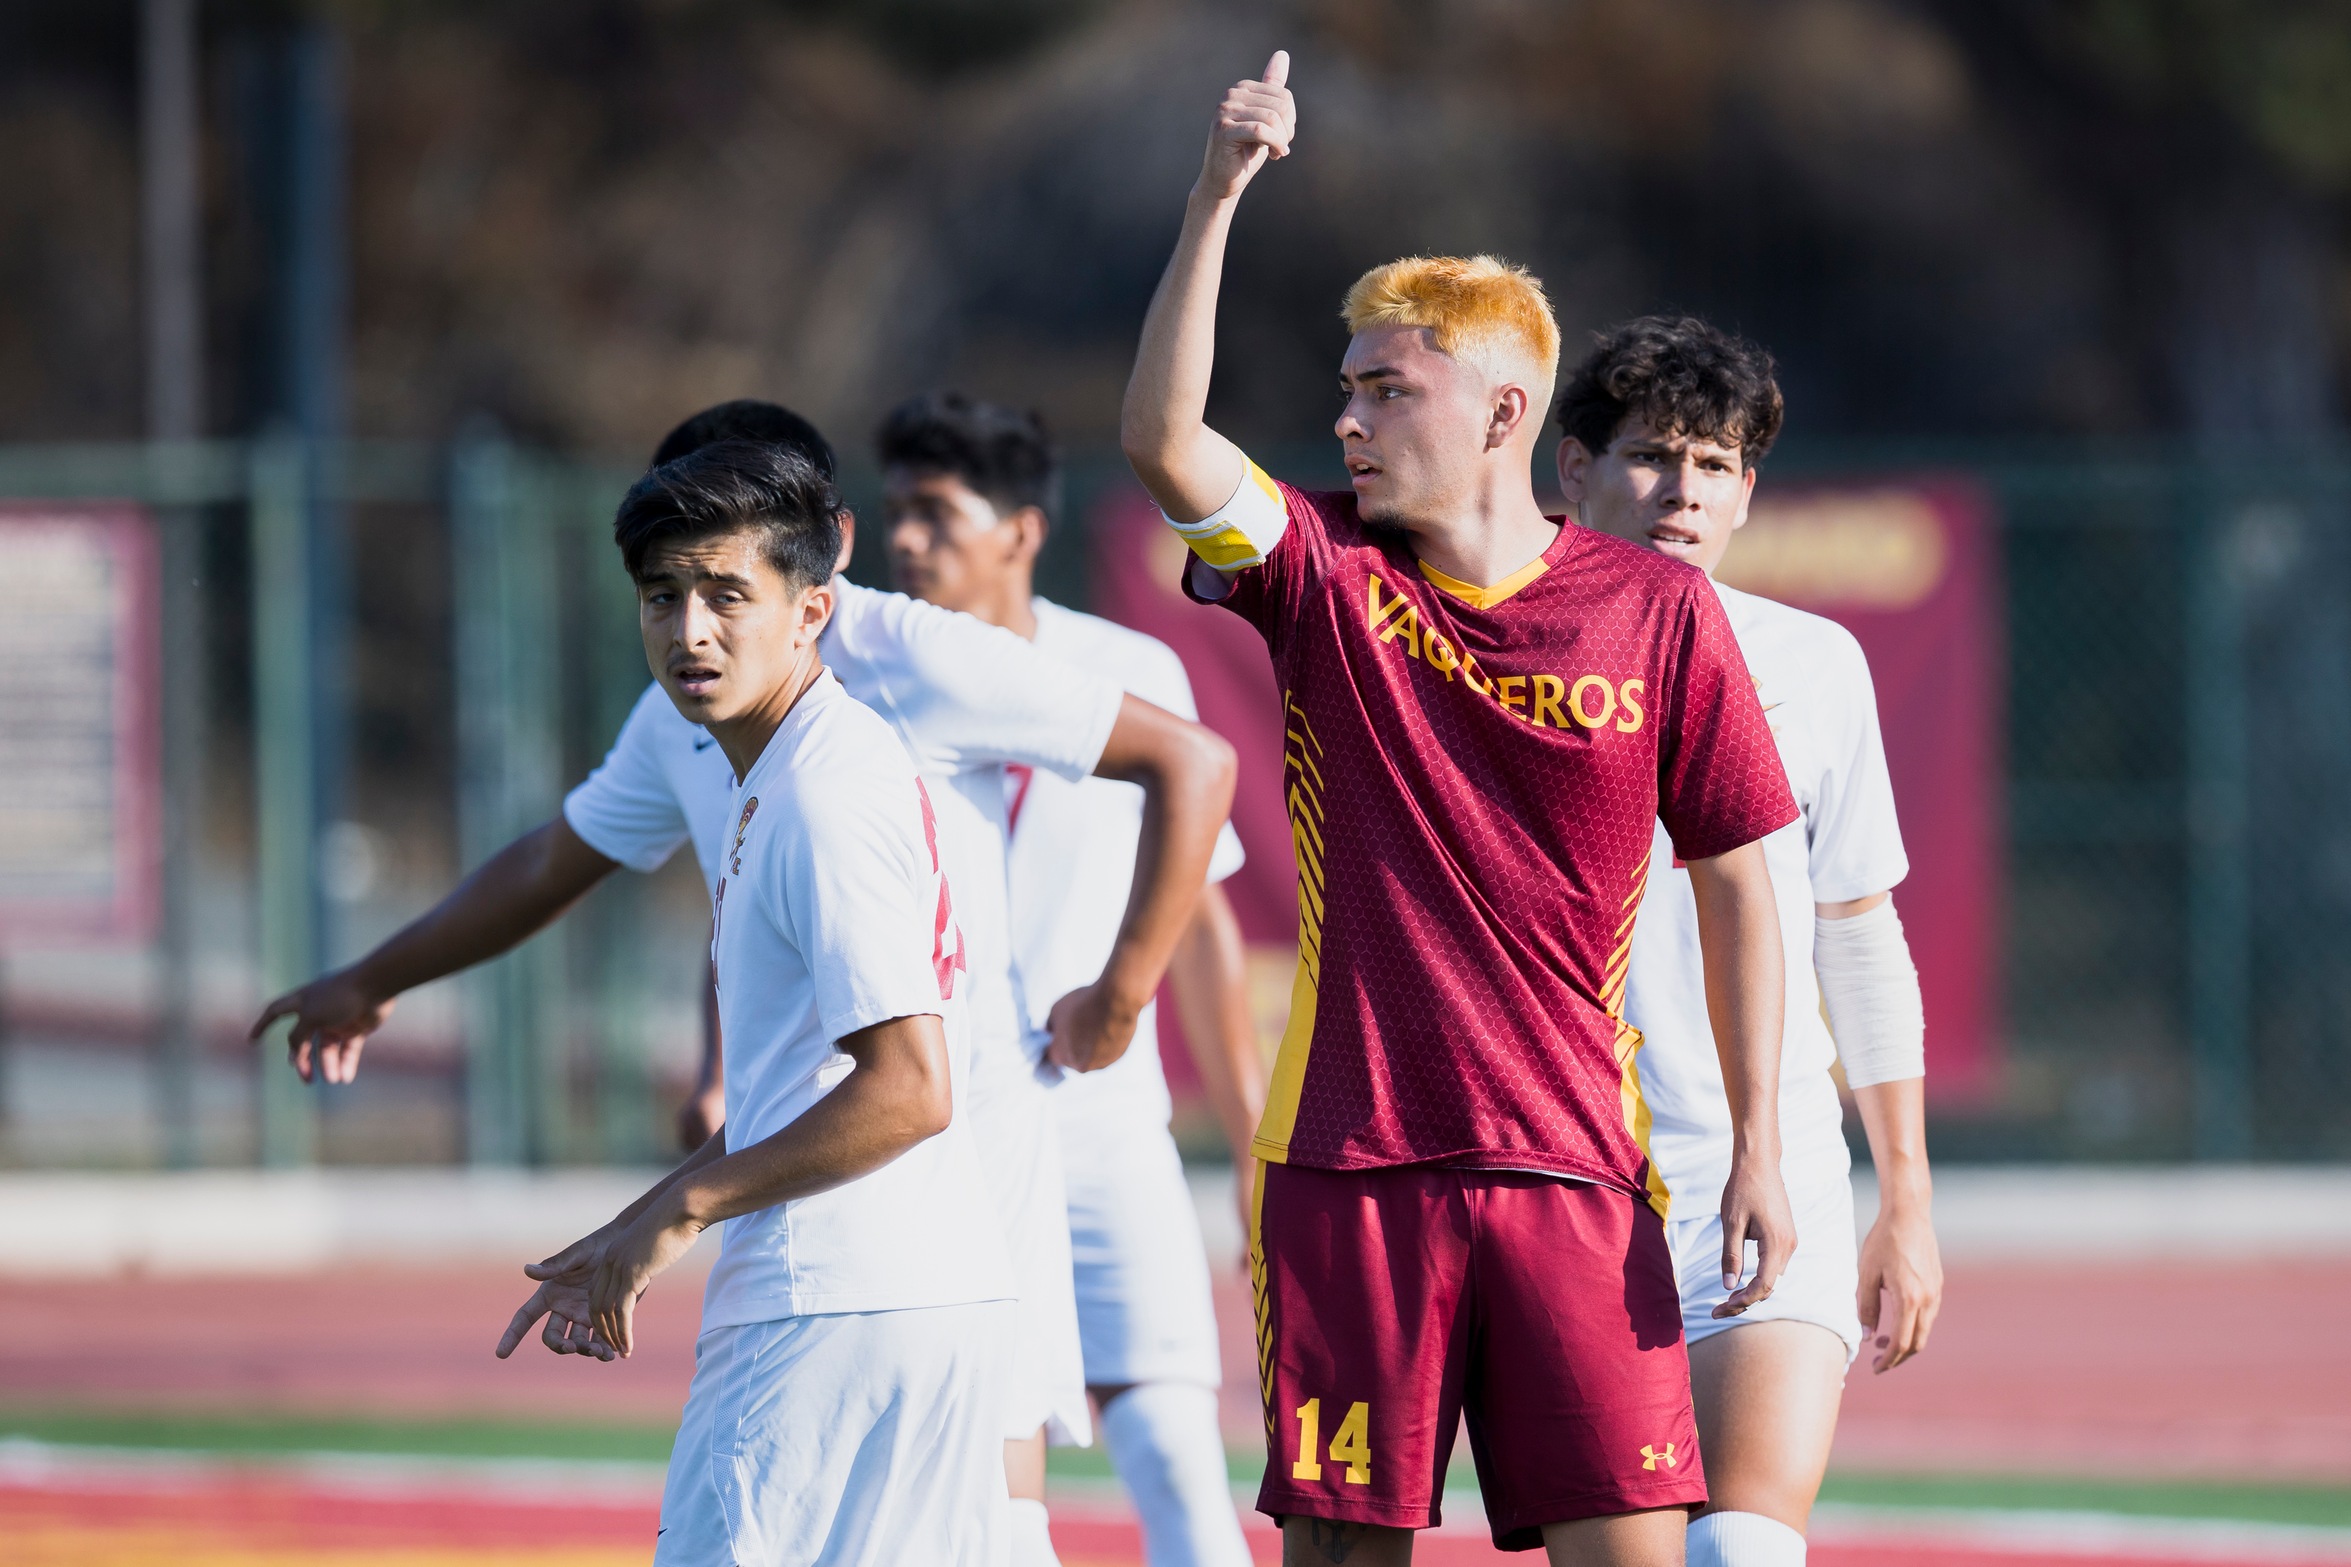 GCC Men's Soccer ends season with 2-0 win over Citrus; Sophomores honored